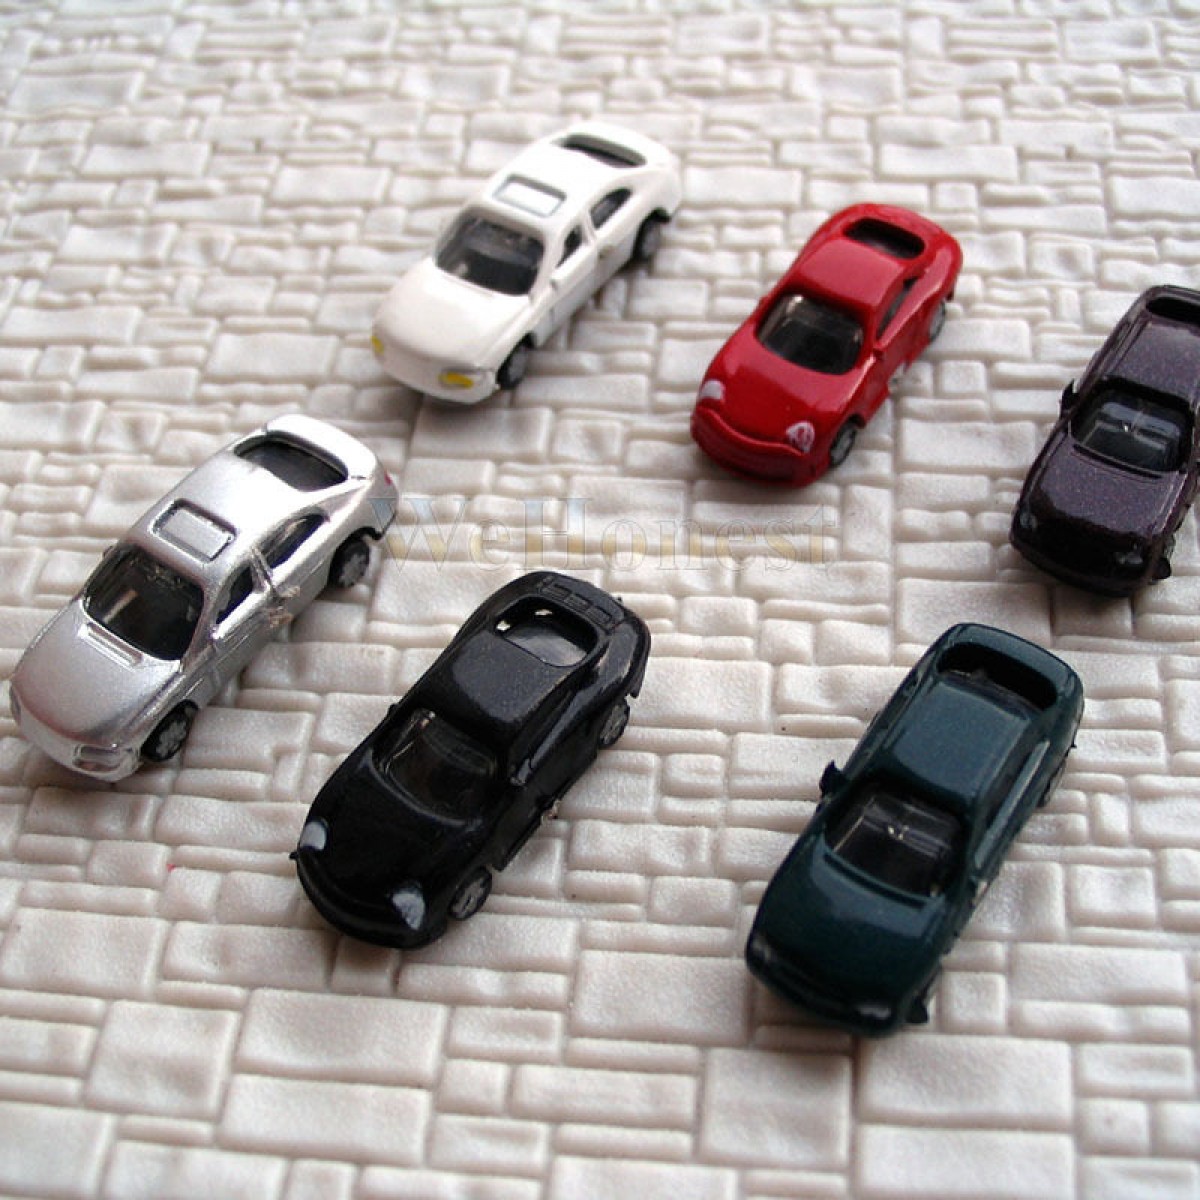 50 pcs Z Scale 1/220th Normally painted Model Cars #C